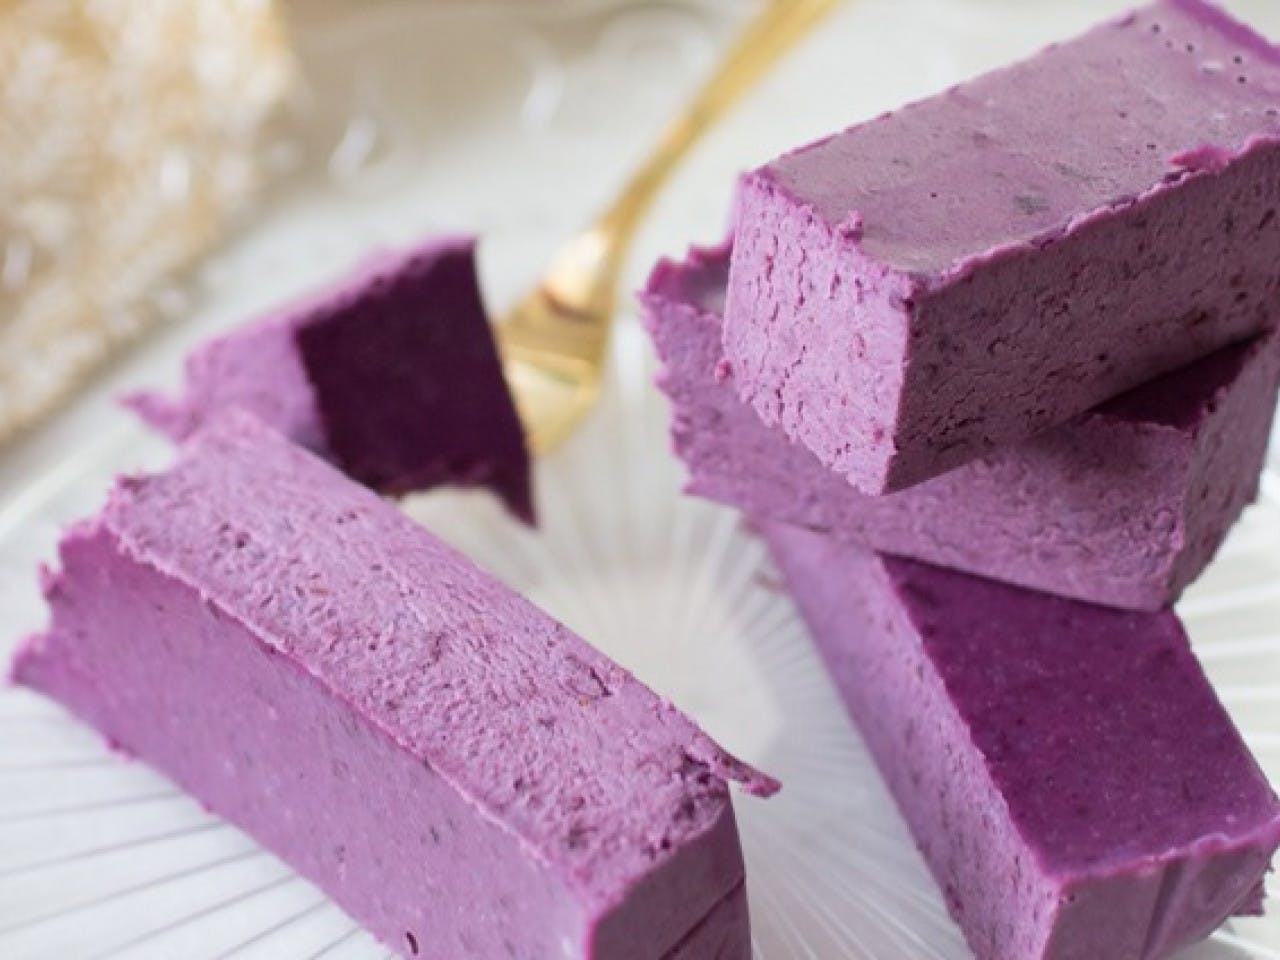 Blueberry fudge with cocoa butter